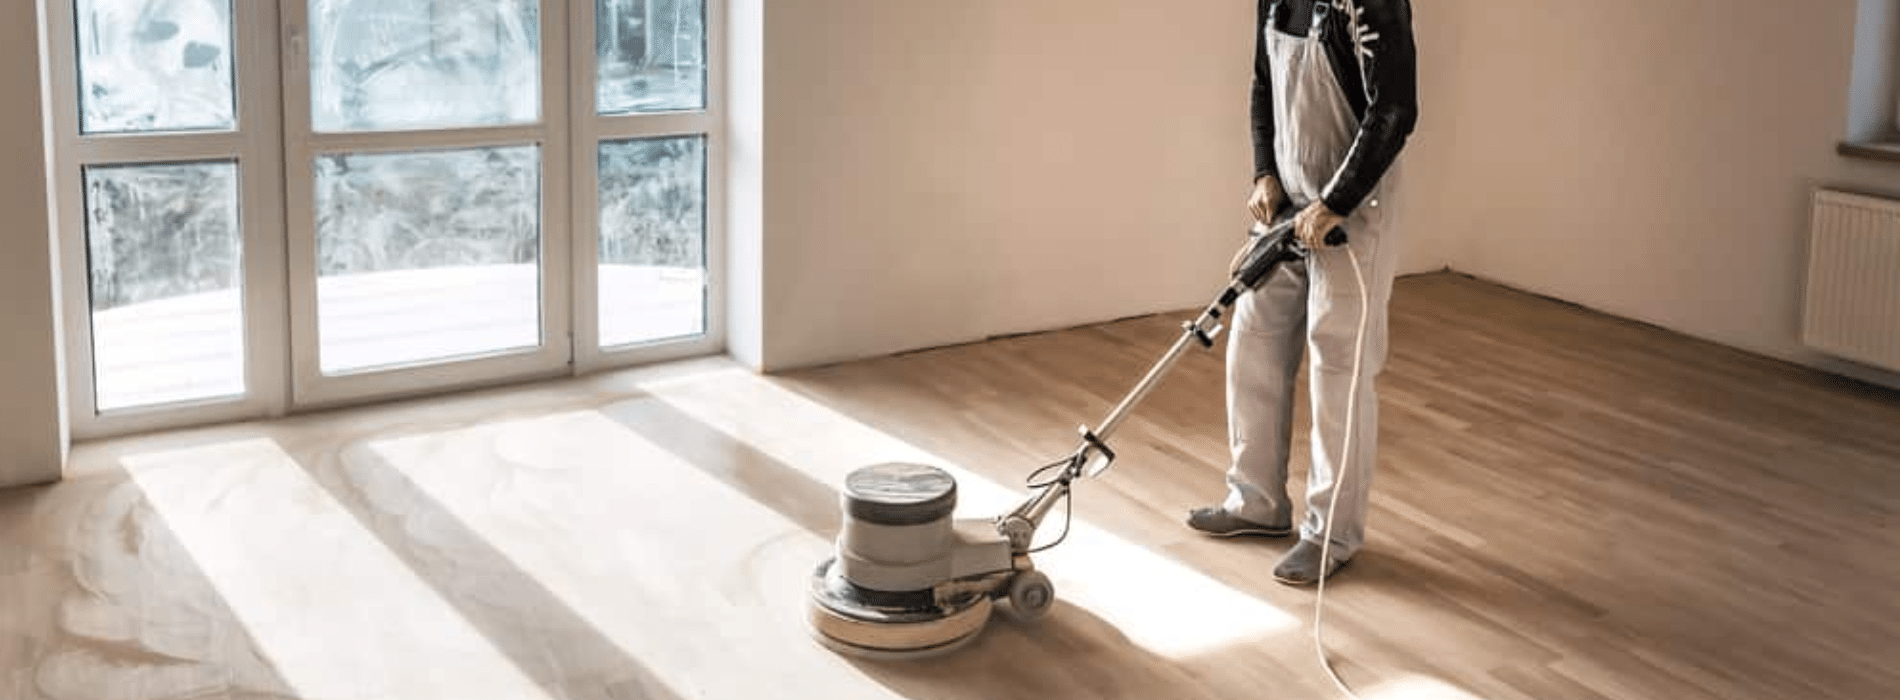 Mr Sander® skillfully sanding a herringbone floor using the powerful Effect 2200 Voltage 230 Frequency 50 Size 200x750 mm Bona buffer sander. The dust extraction system with HEPA filter ensures a clean and efficient process. Witness the expertise of Mr Sander® in Greenwich, SE10.